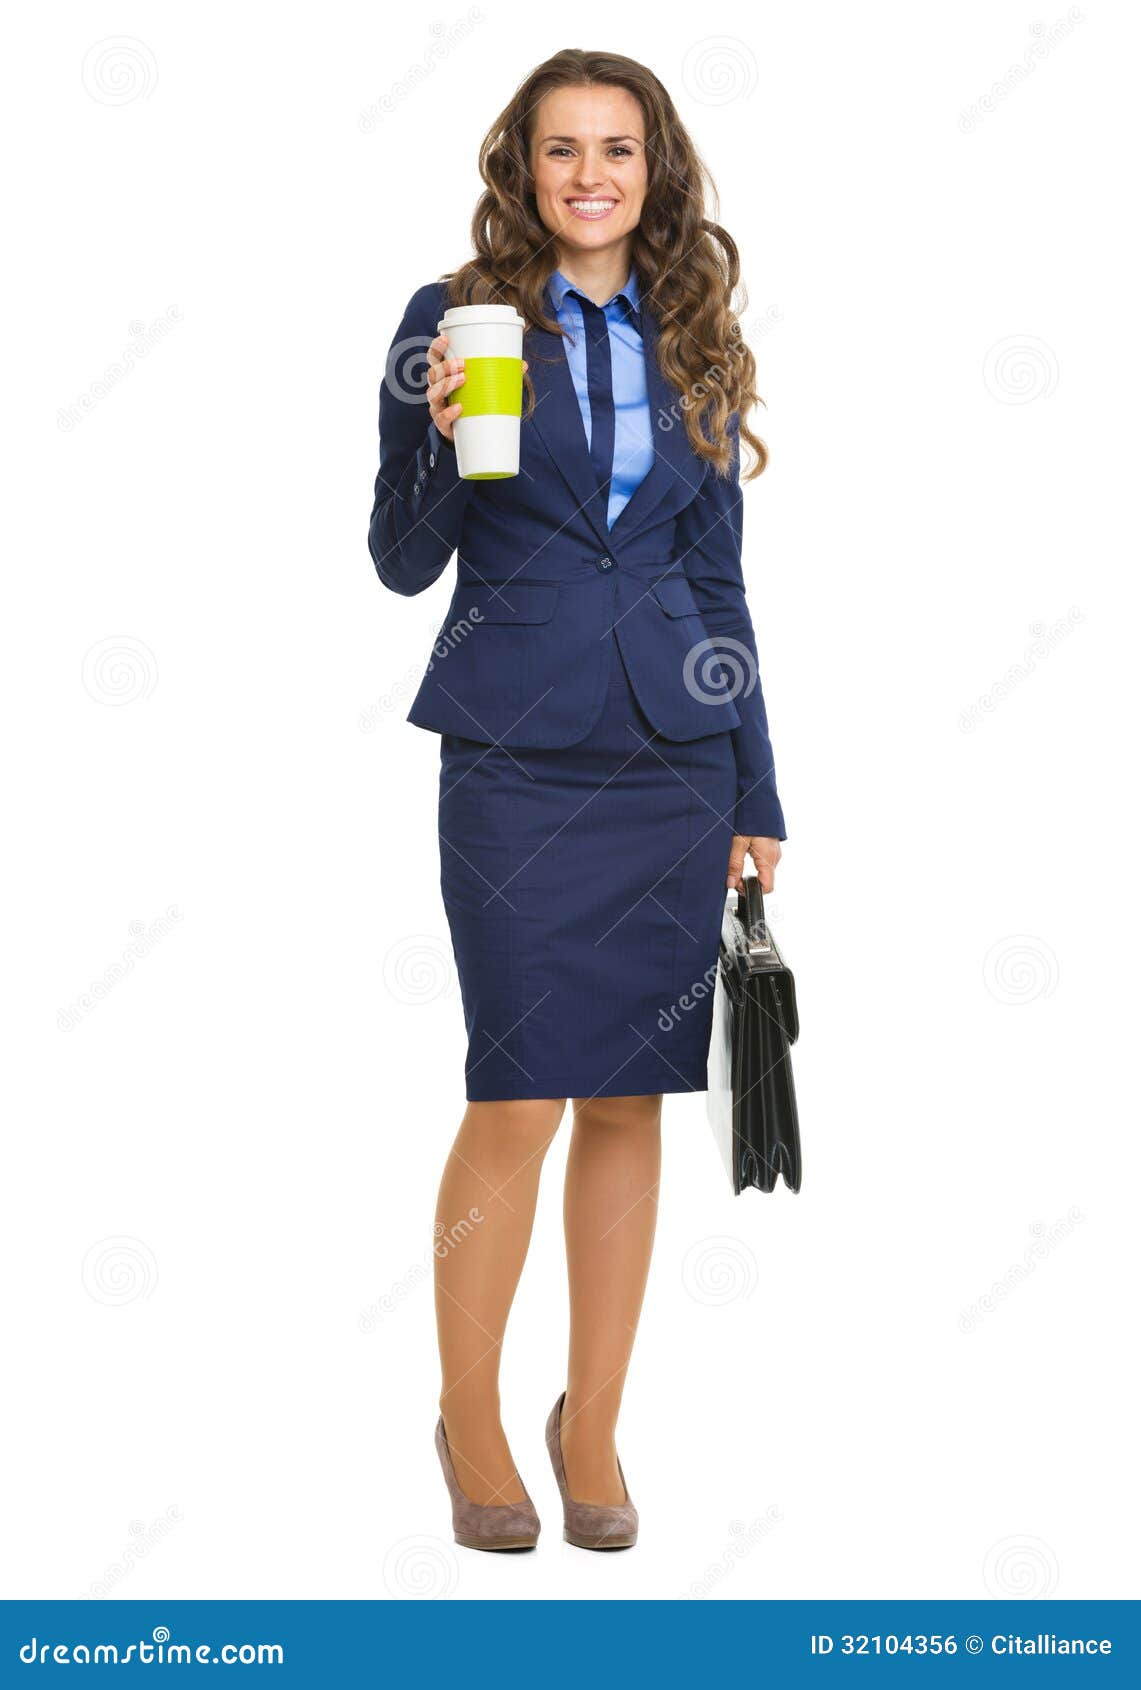 Full length portrait of smiling business woman with briefcase and cofee cup isolated on white